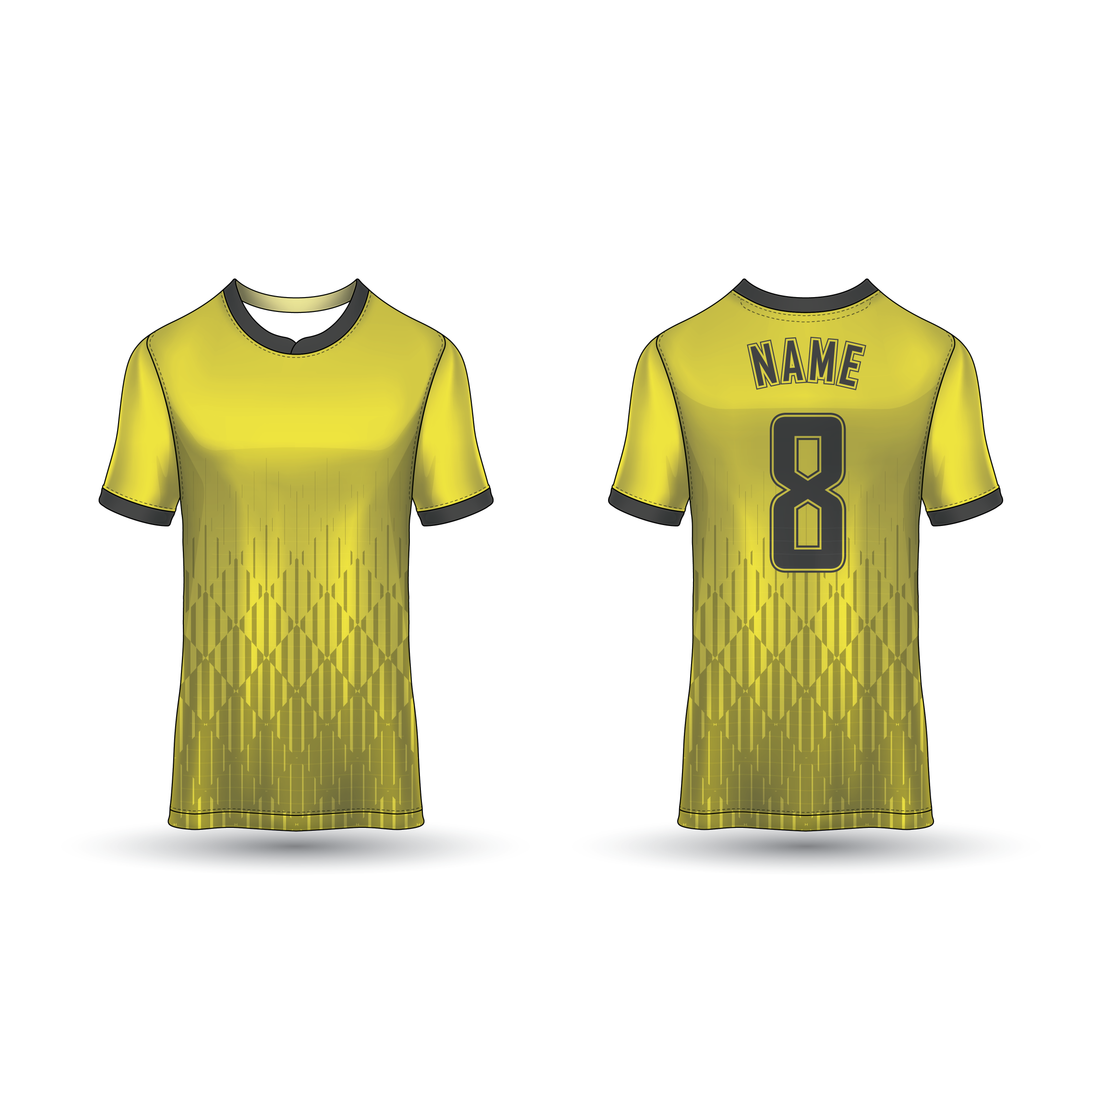 NEXT PRINT All Over Printed Customized Sublimation T-Shirt Unisex Sports Jersey Player Name & Number, Team Name NP50000244